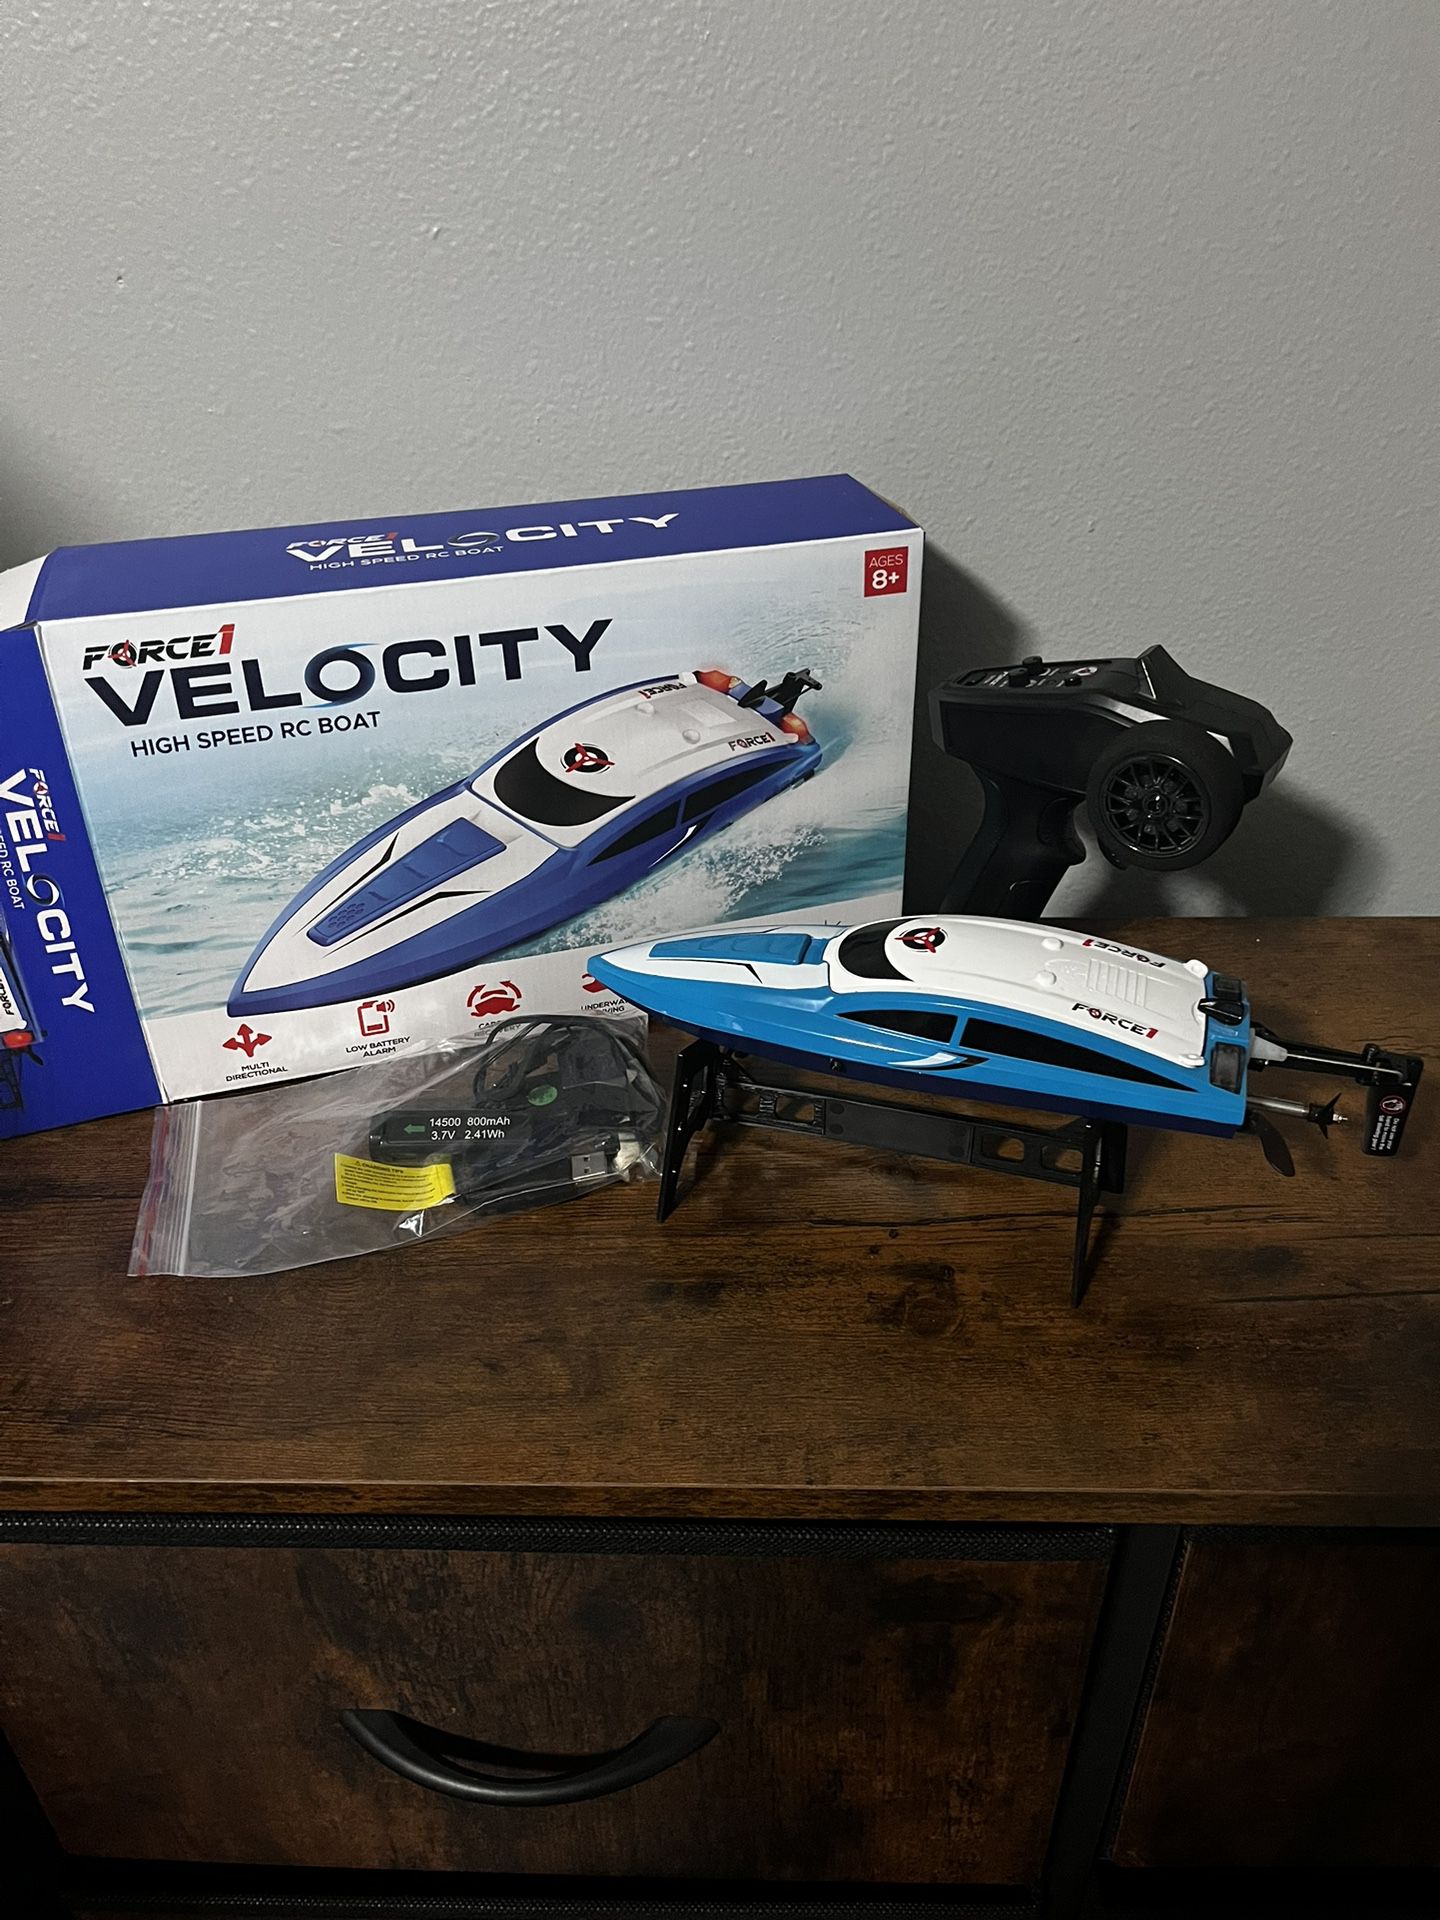 Force 1 Velocity High Speed RC Boat.  (Blue)